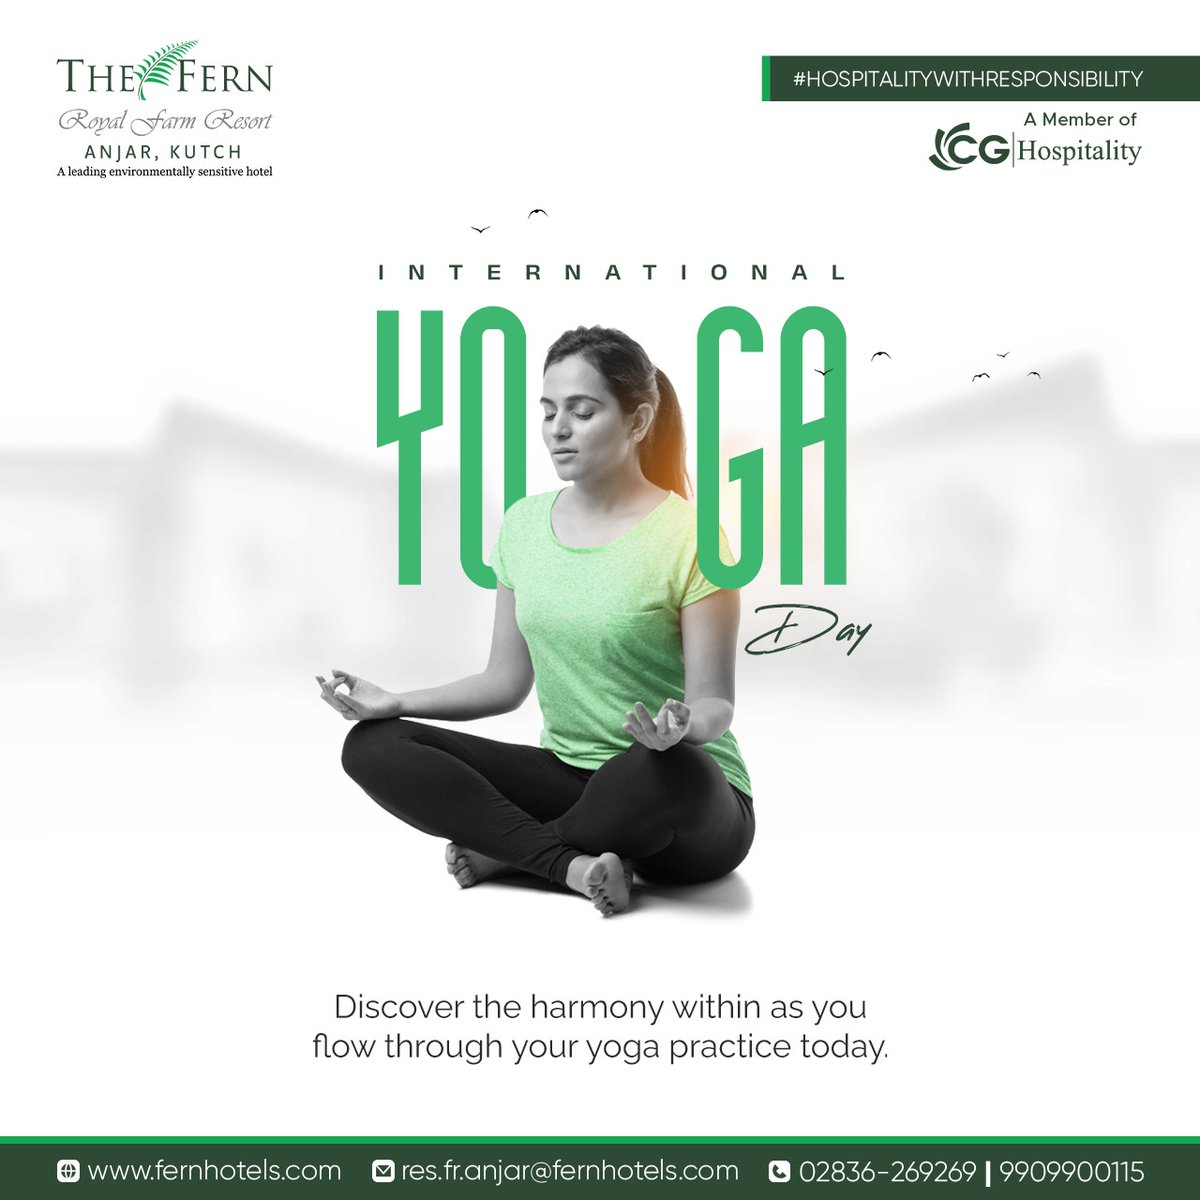 Stretch, breathe, and find your inner peace!

Happy #InternationalYogaDay from all of us at Fern-Anjar (Kutch). 

May your practice bring balance, serenity, and wellness into your life.

Book your stay now - fernhotels.com/the-fern-royal…

#FernAnjar #HospitalityWithResponsibility